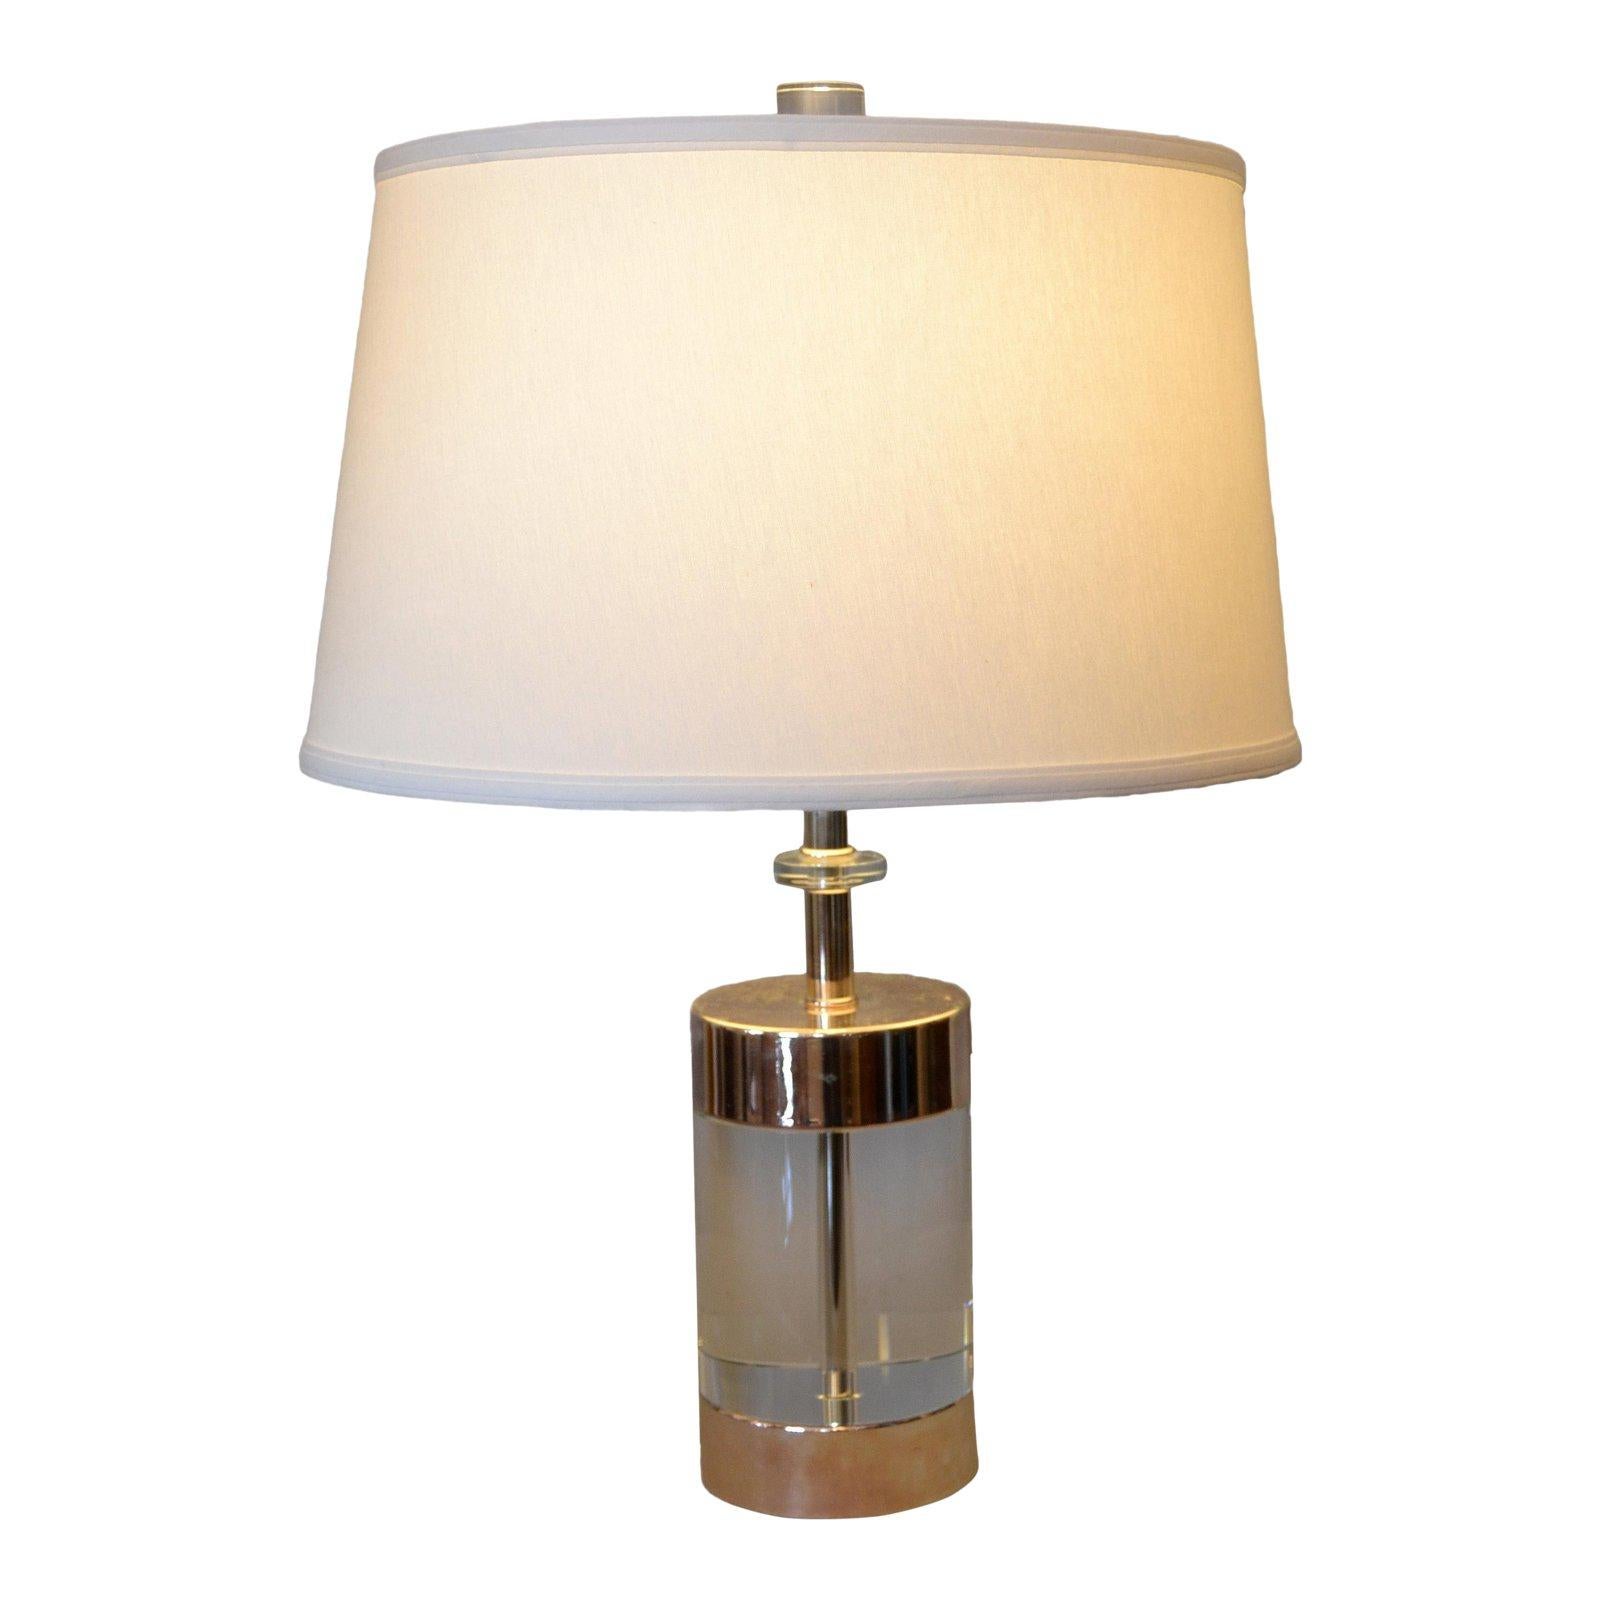 Mid-Century Modern Lucite and Nickel Table Lamp For Sale